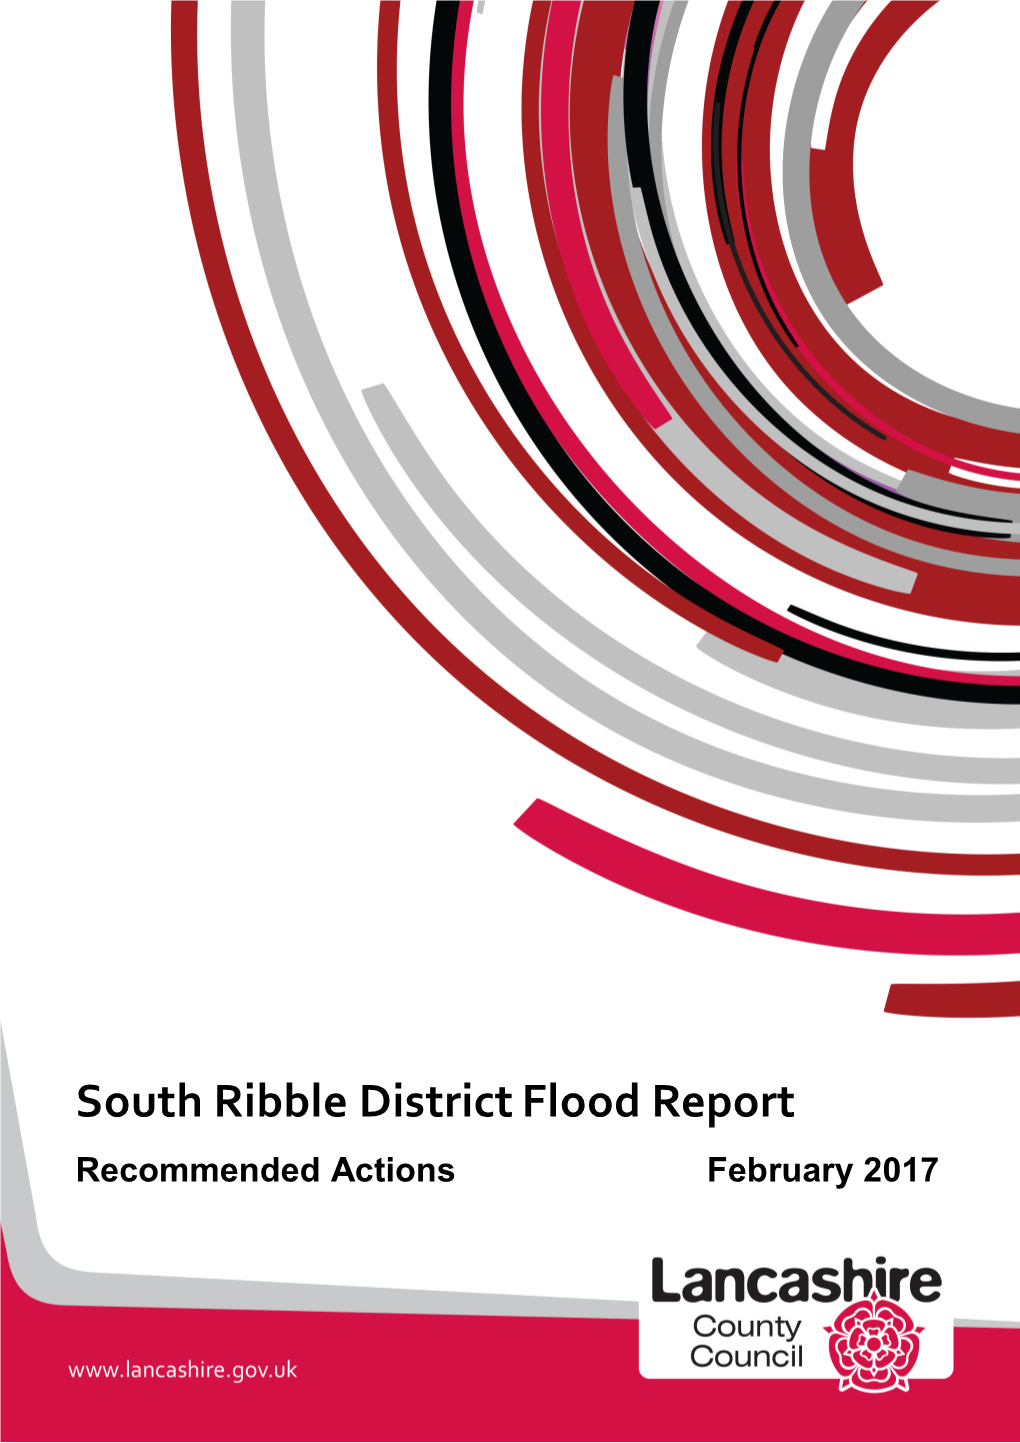 South Ribble District Flood Report Recommended Actions February 2017